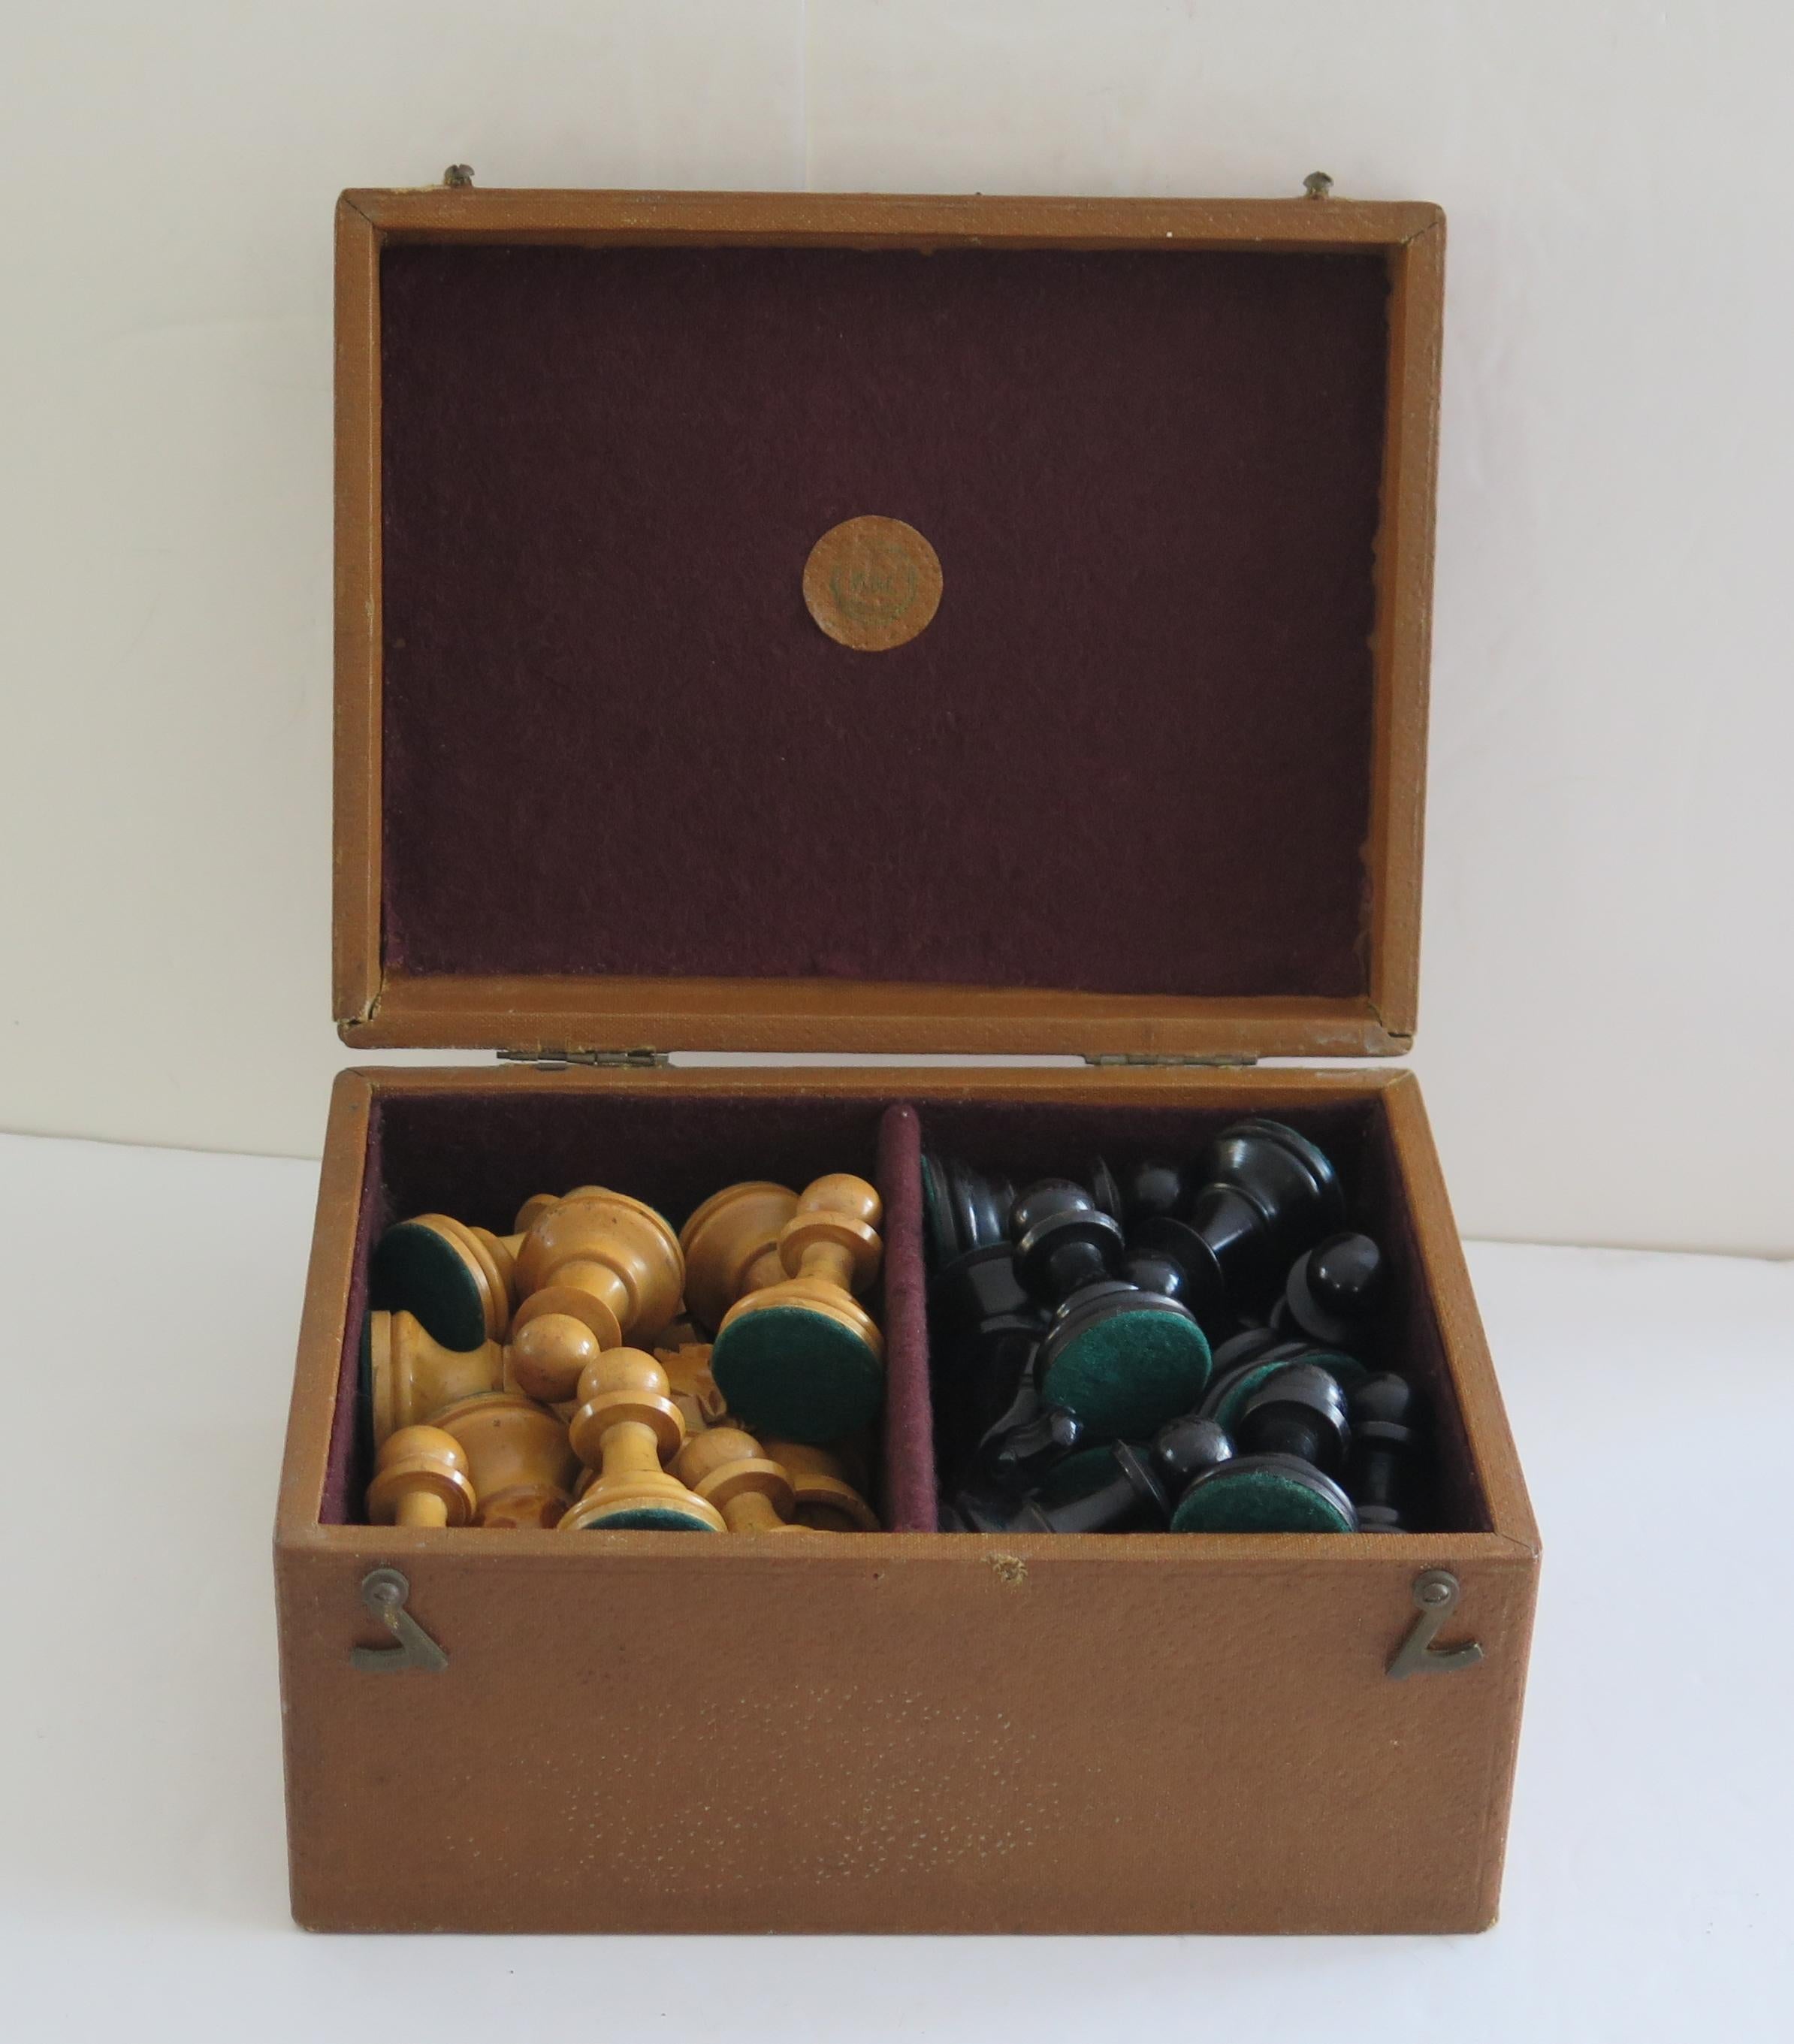 Edwardian Antique Weighted Chess Set 95mm Kings Fierce Knight Boxed, K&C London Ca 1900